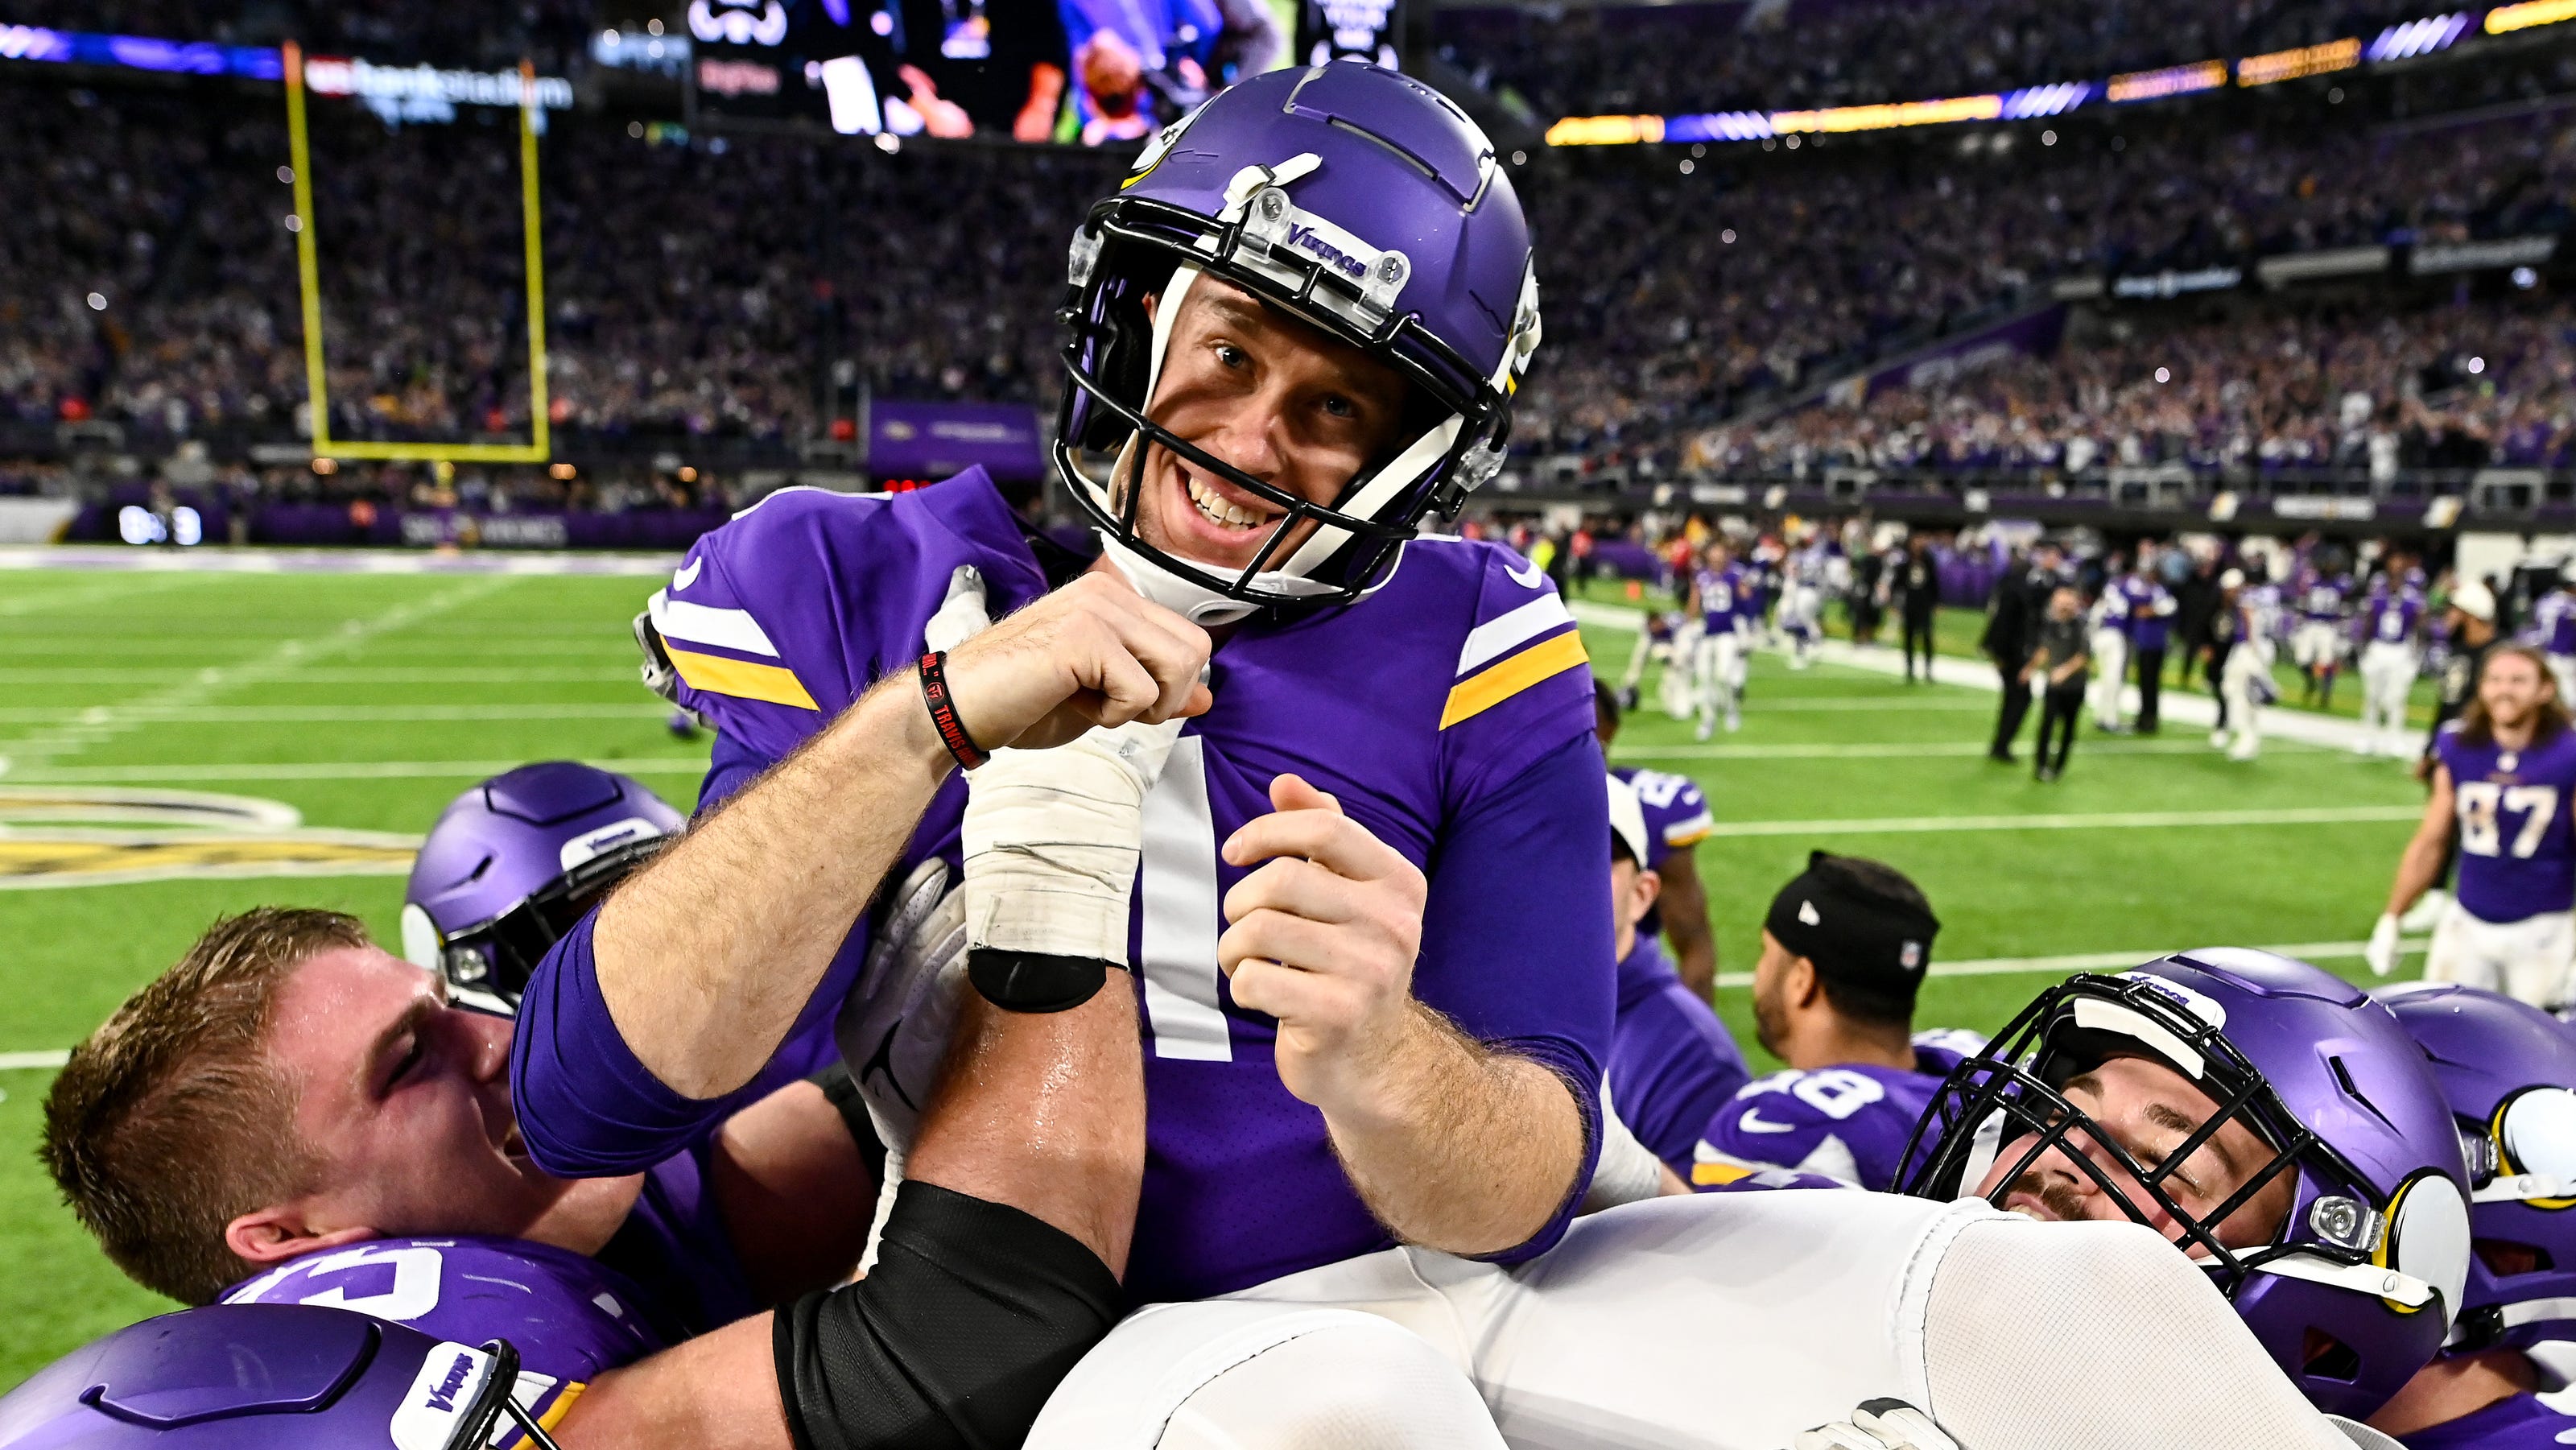 Vikings pull off biggest comeback in NFL history with victory over Colts